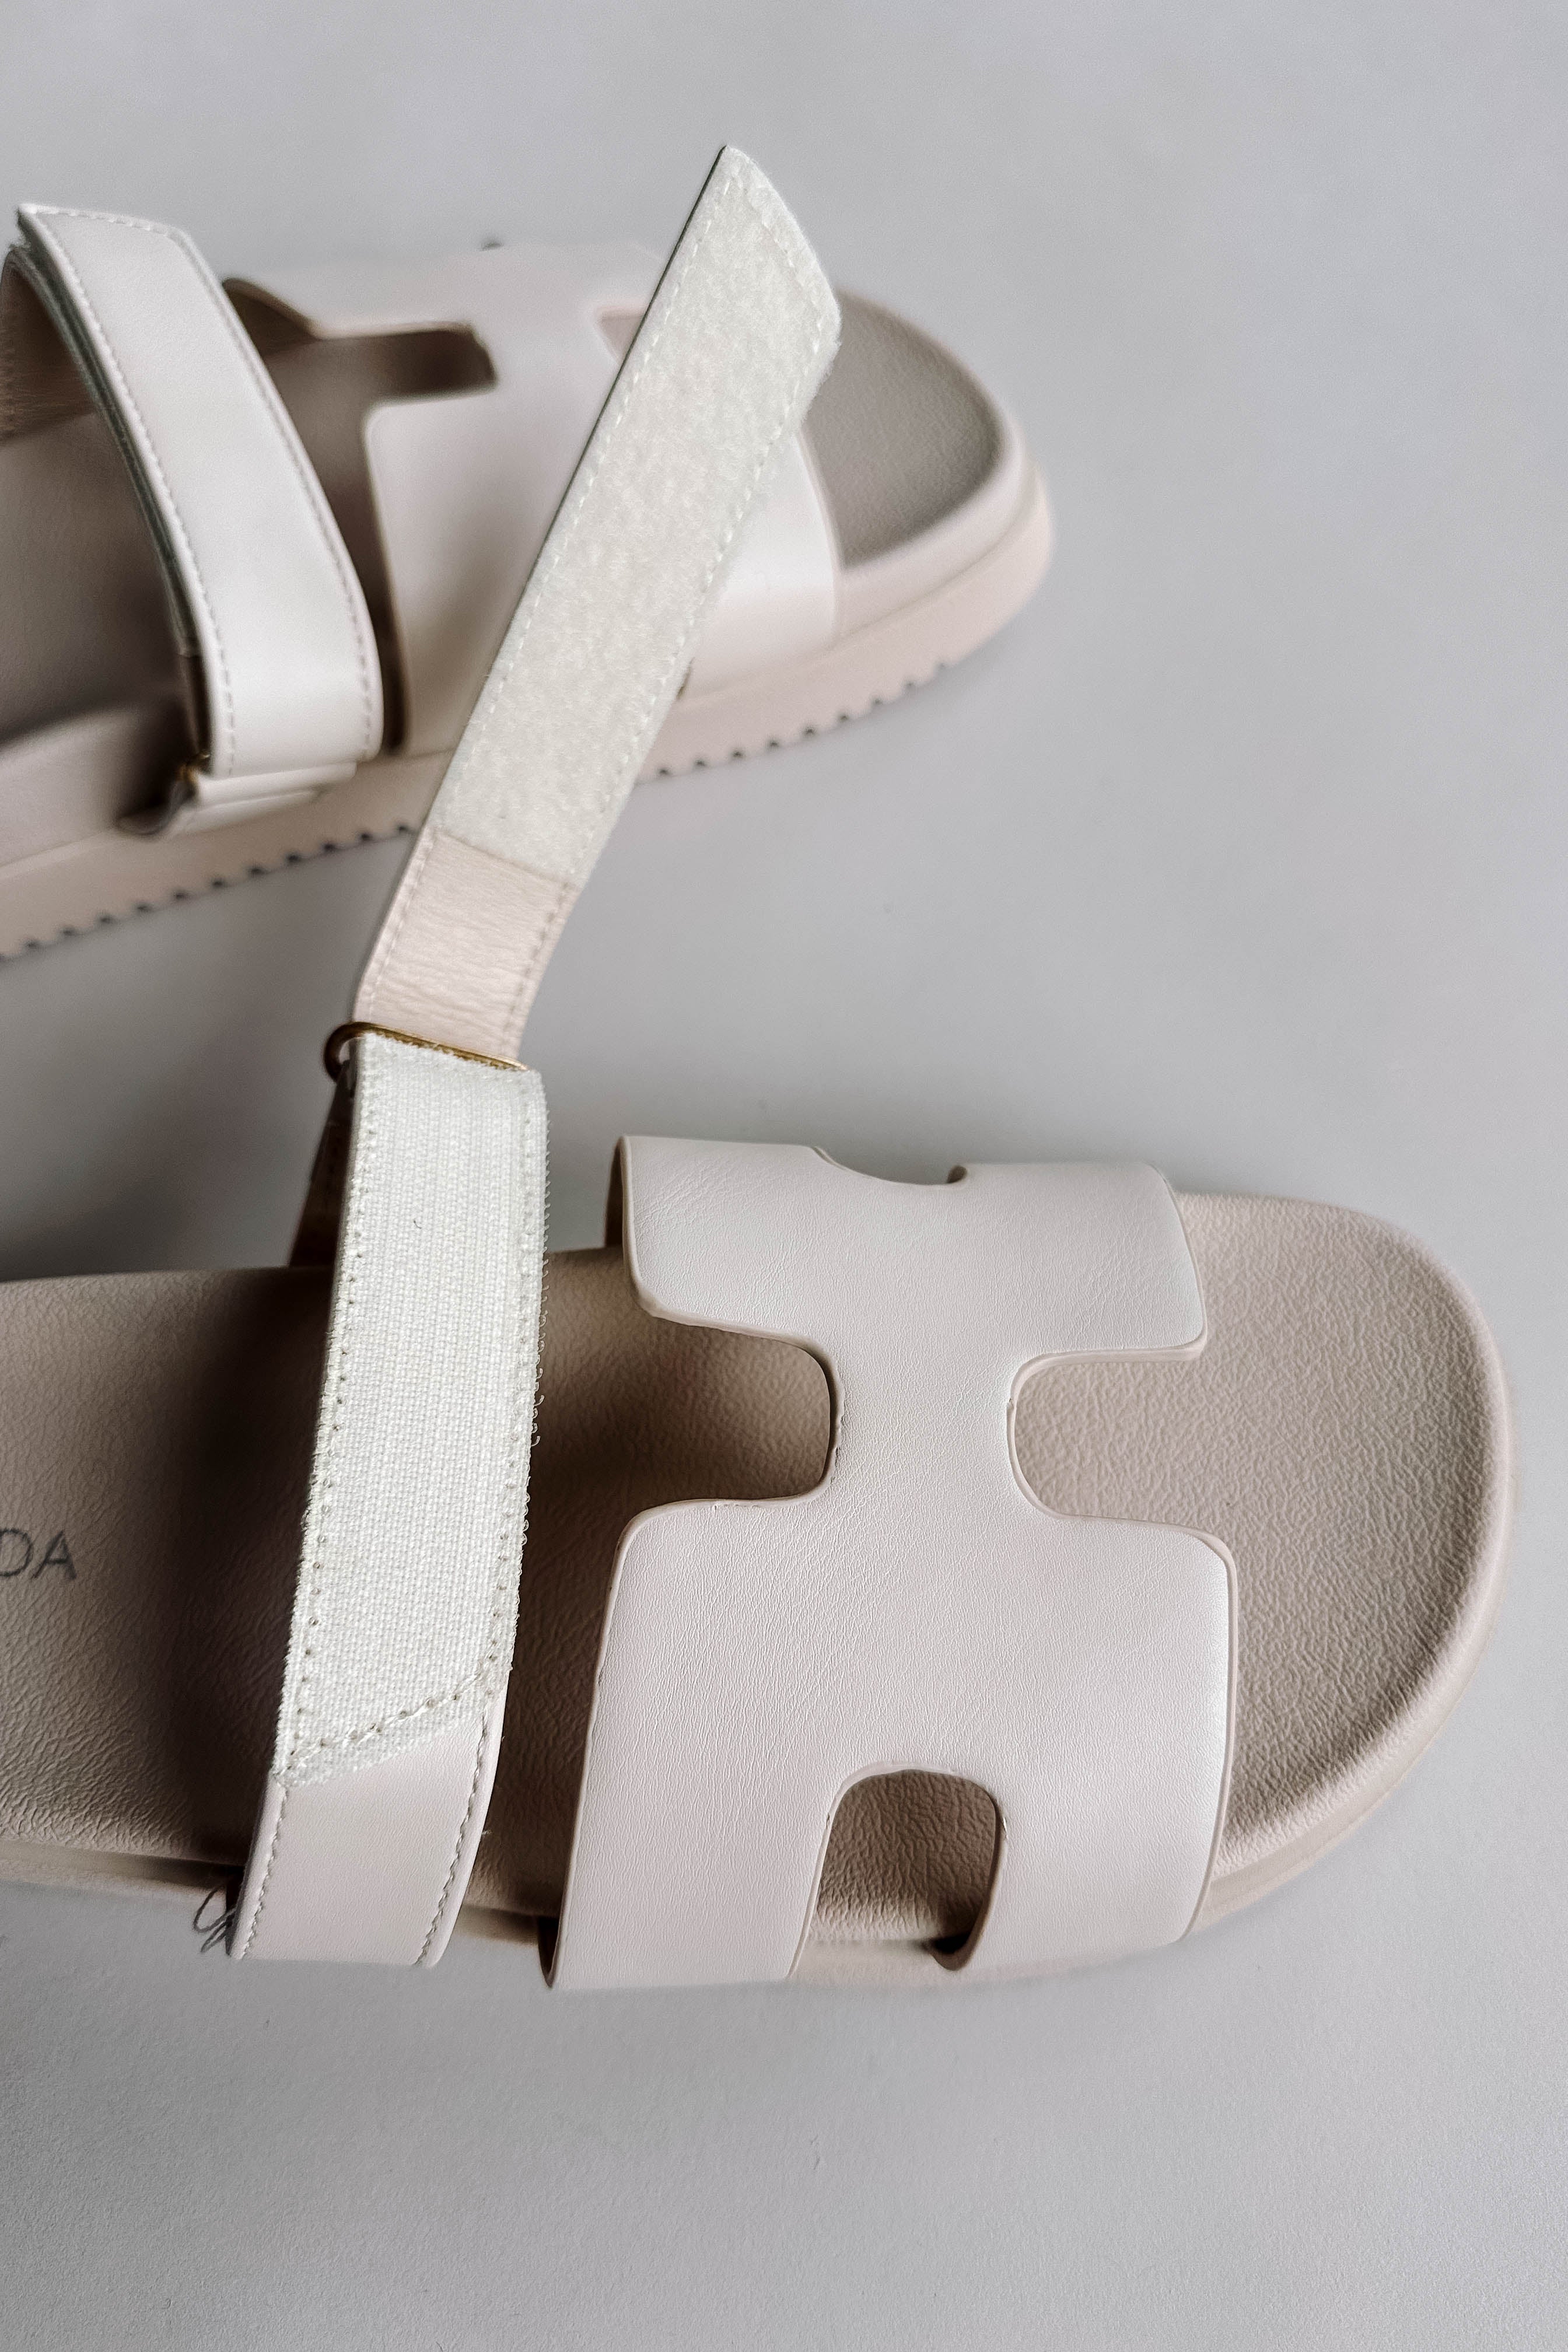 Side view of the Jade Strap Sandal in Ivory which features ivory leather fabric, slide-on style, H-shaped strap, adjustable velcro strap and round toe.